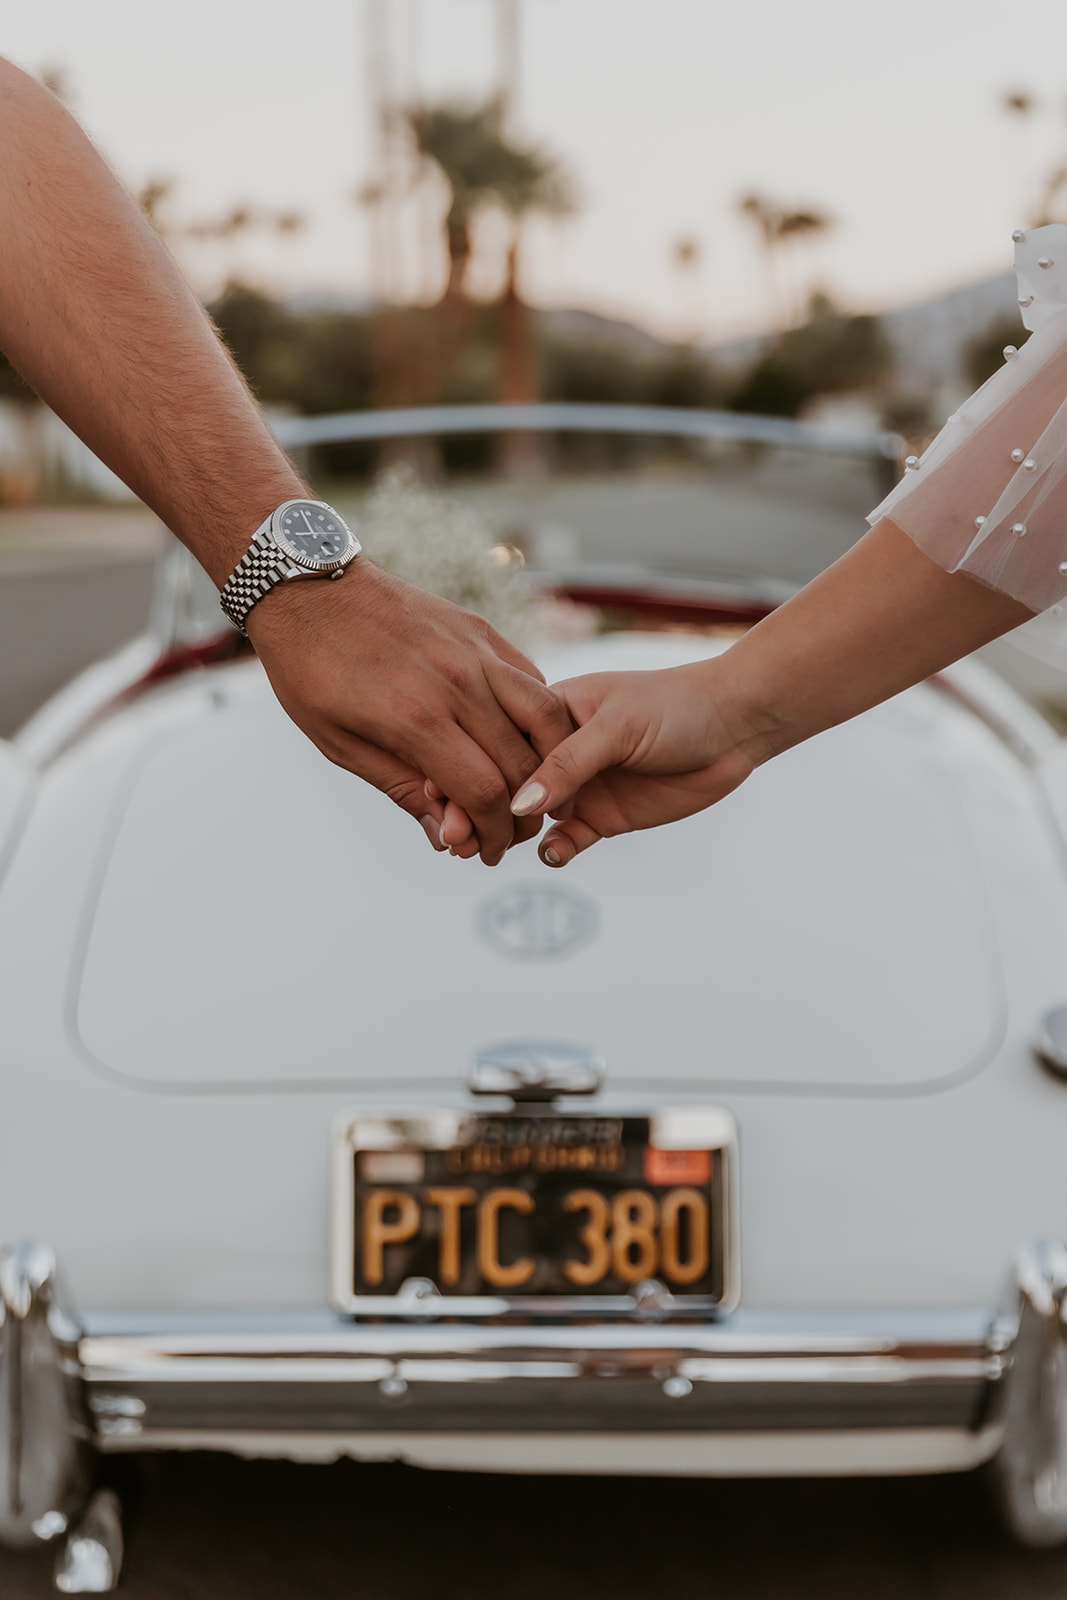 hands of a newly engaged couple showcasing an engagement ring and classic car in the background